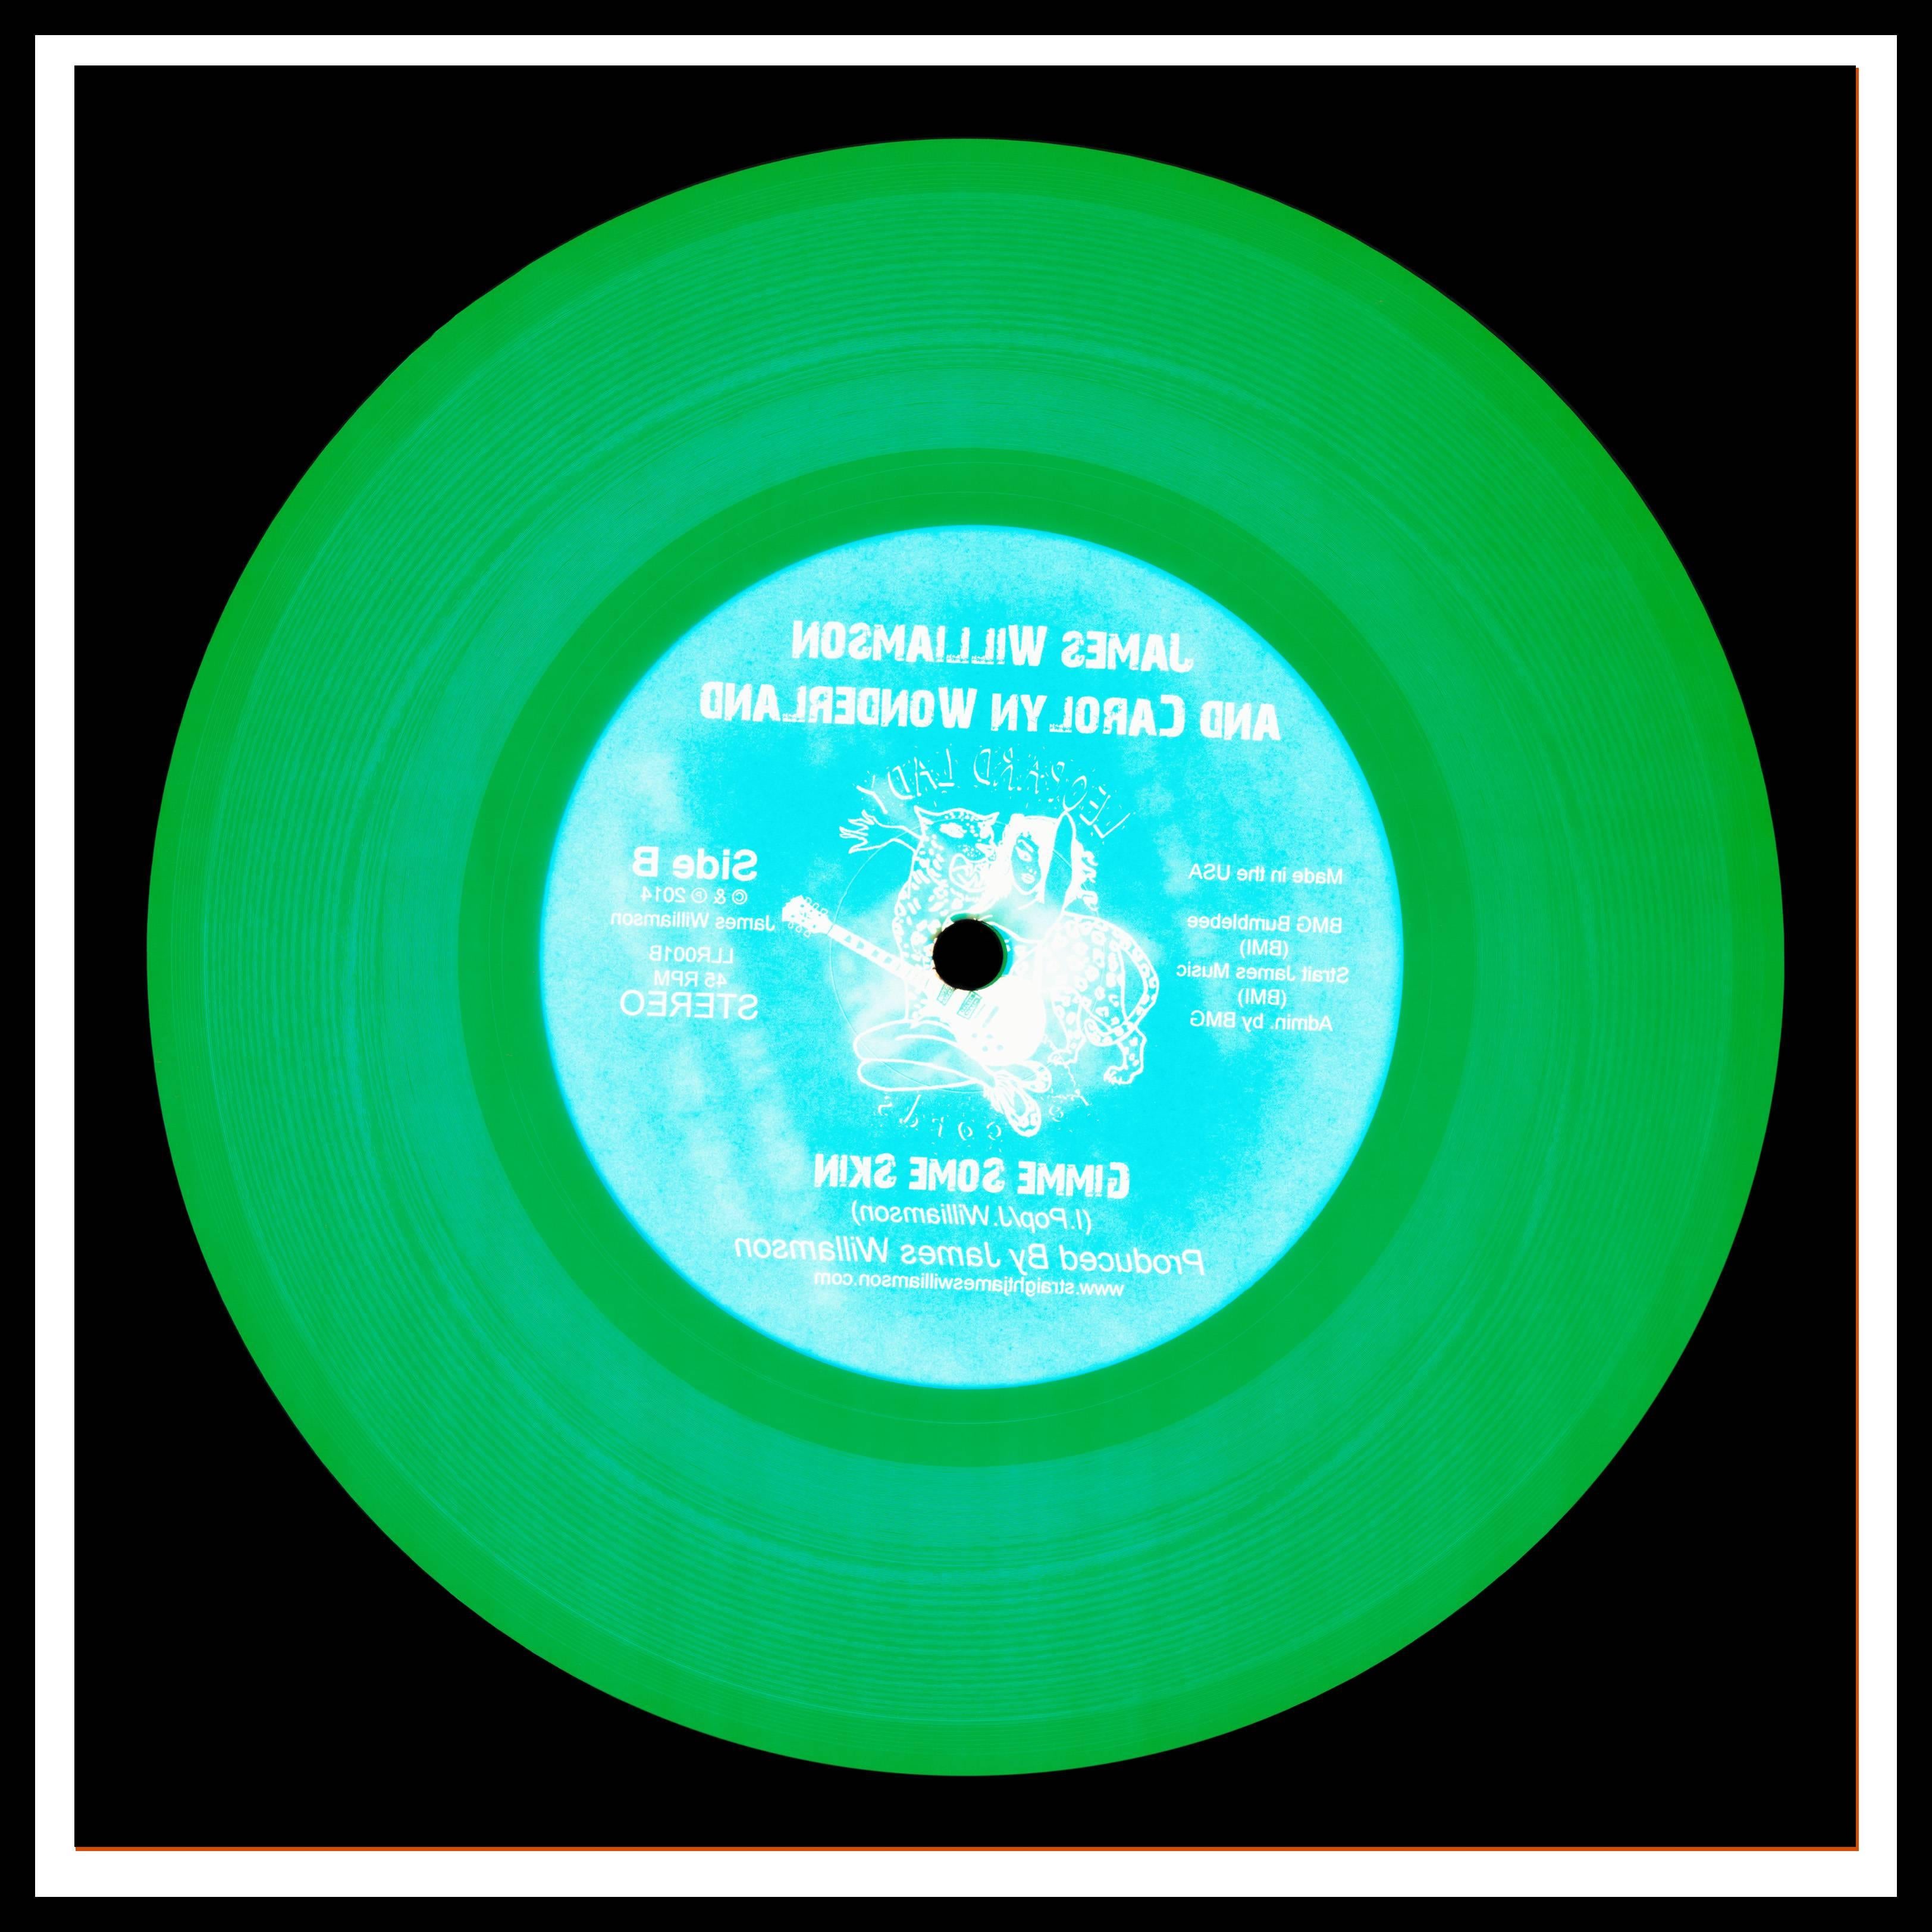 Vinyl Collection, Made in the USA - Green Conceptual Pop Art Color Photography For Sale 4